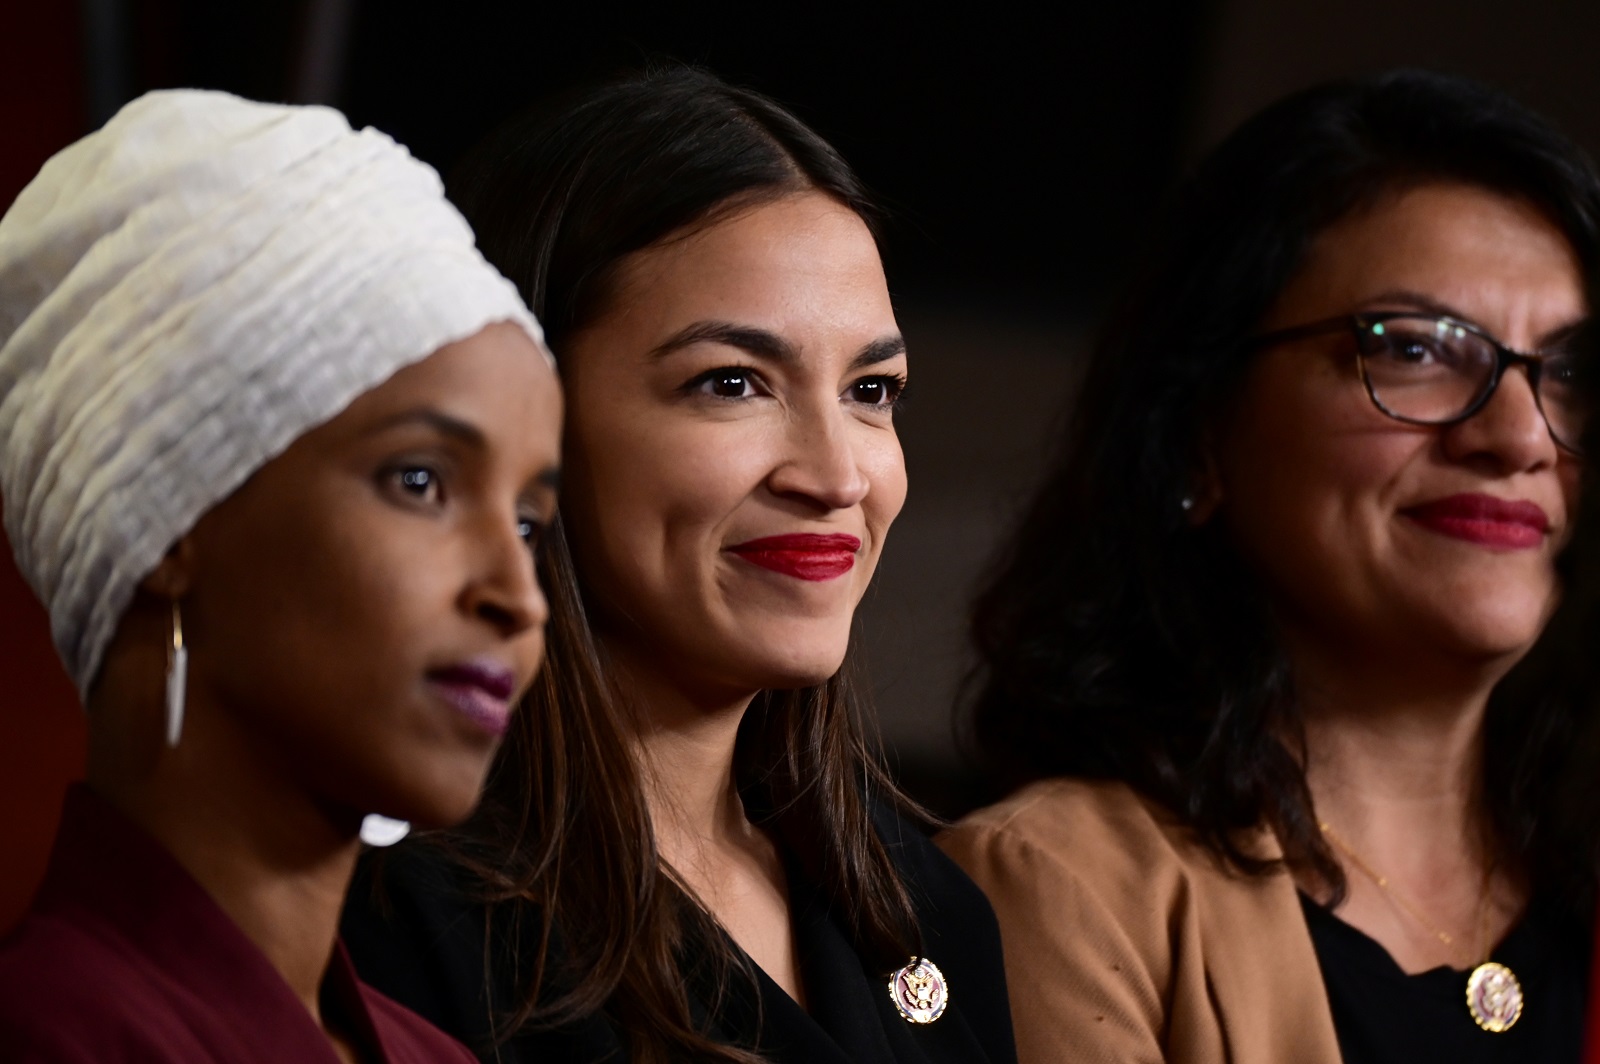 Donald Trump Vs Aoc And The Squad Who Wins This Political Showdown The National Interest 3417